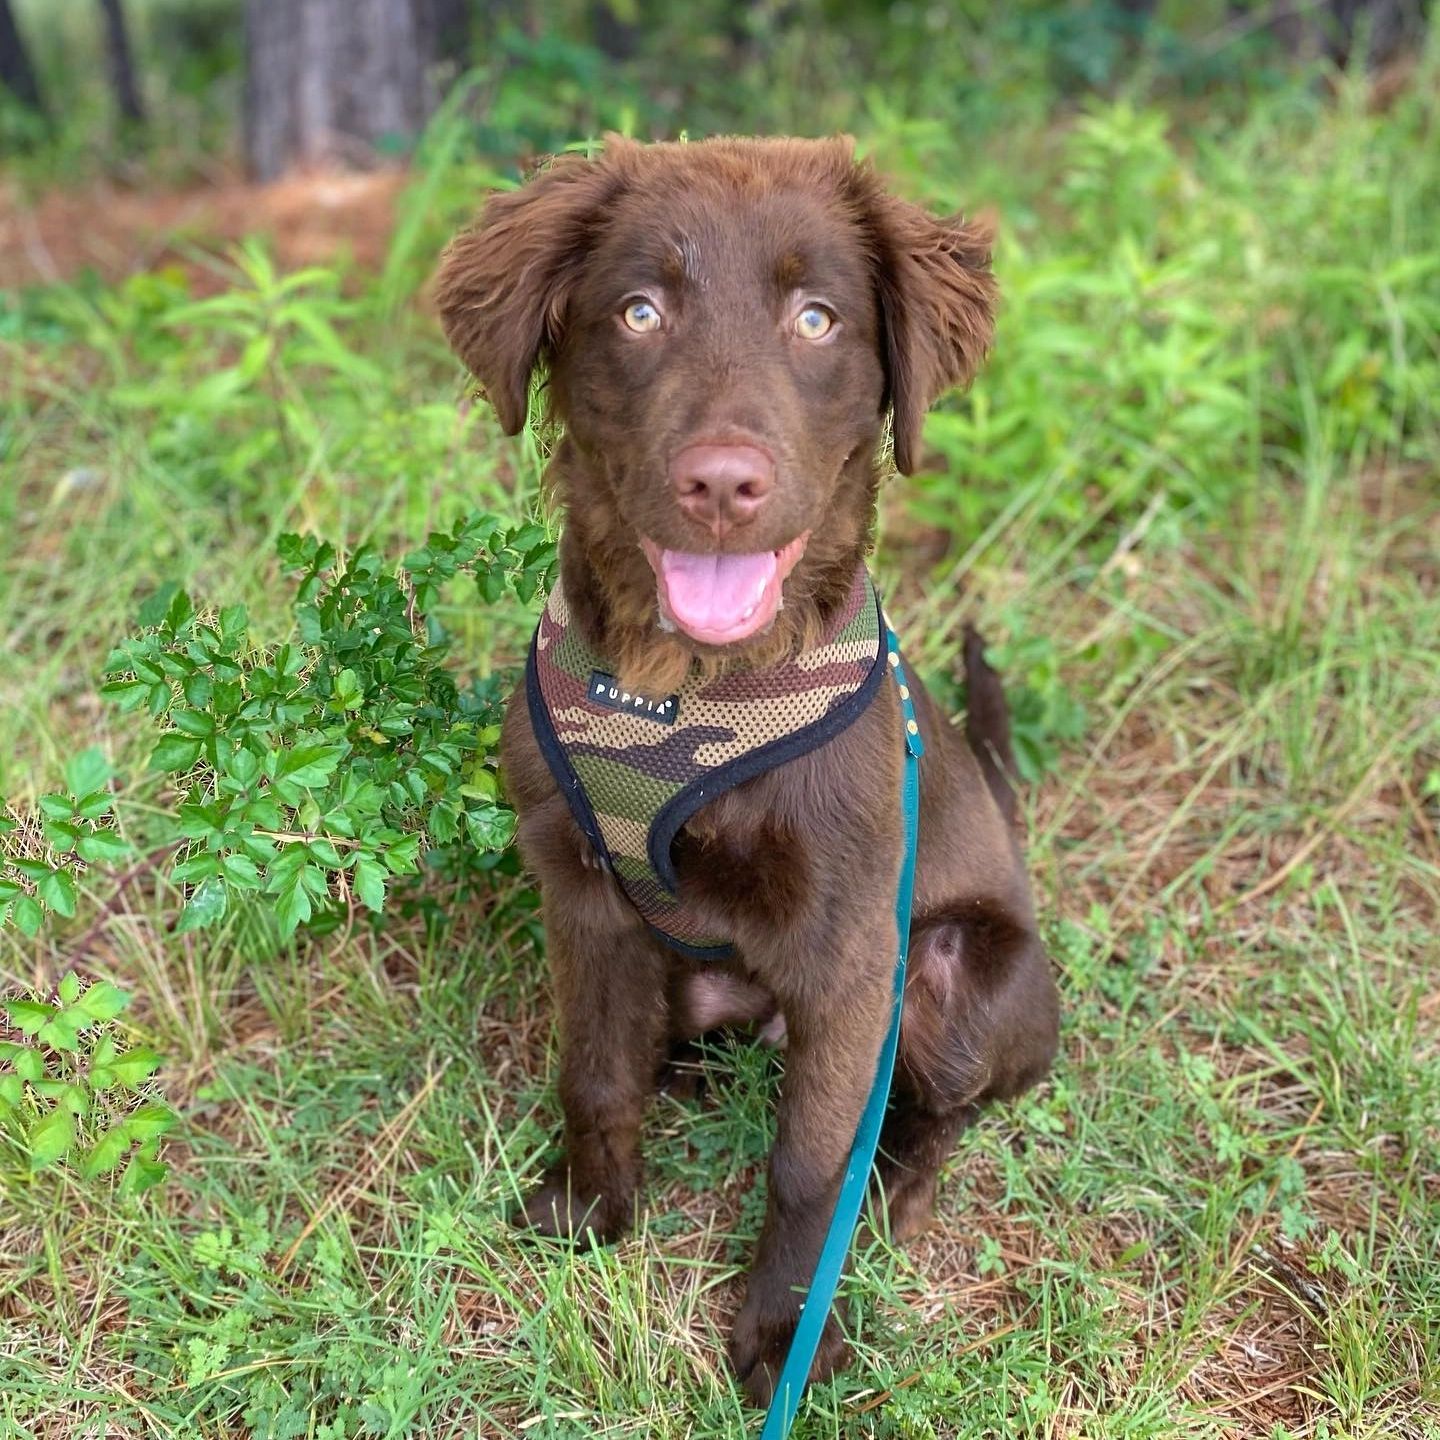 A chocolate colored retriever mix with a camo harness sitting in the grass.